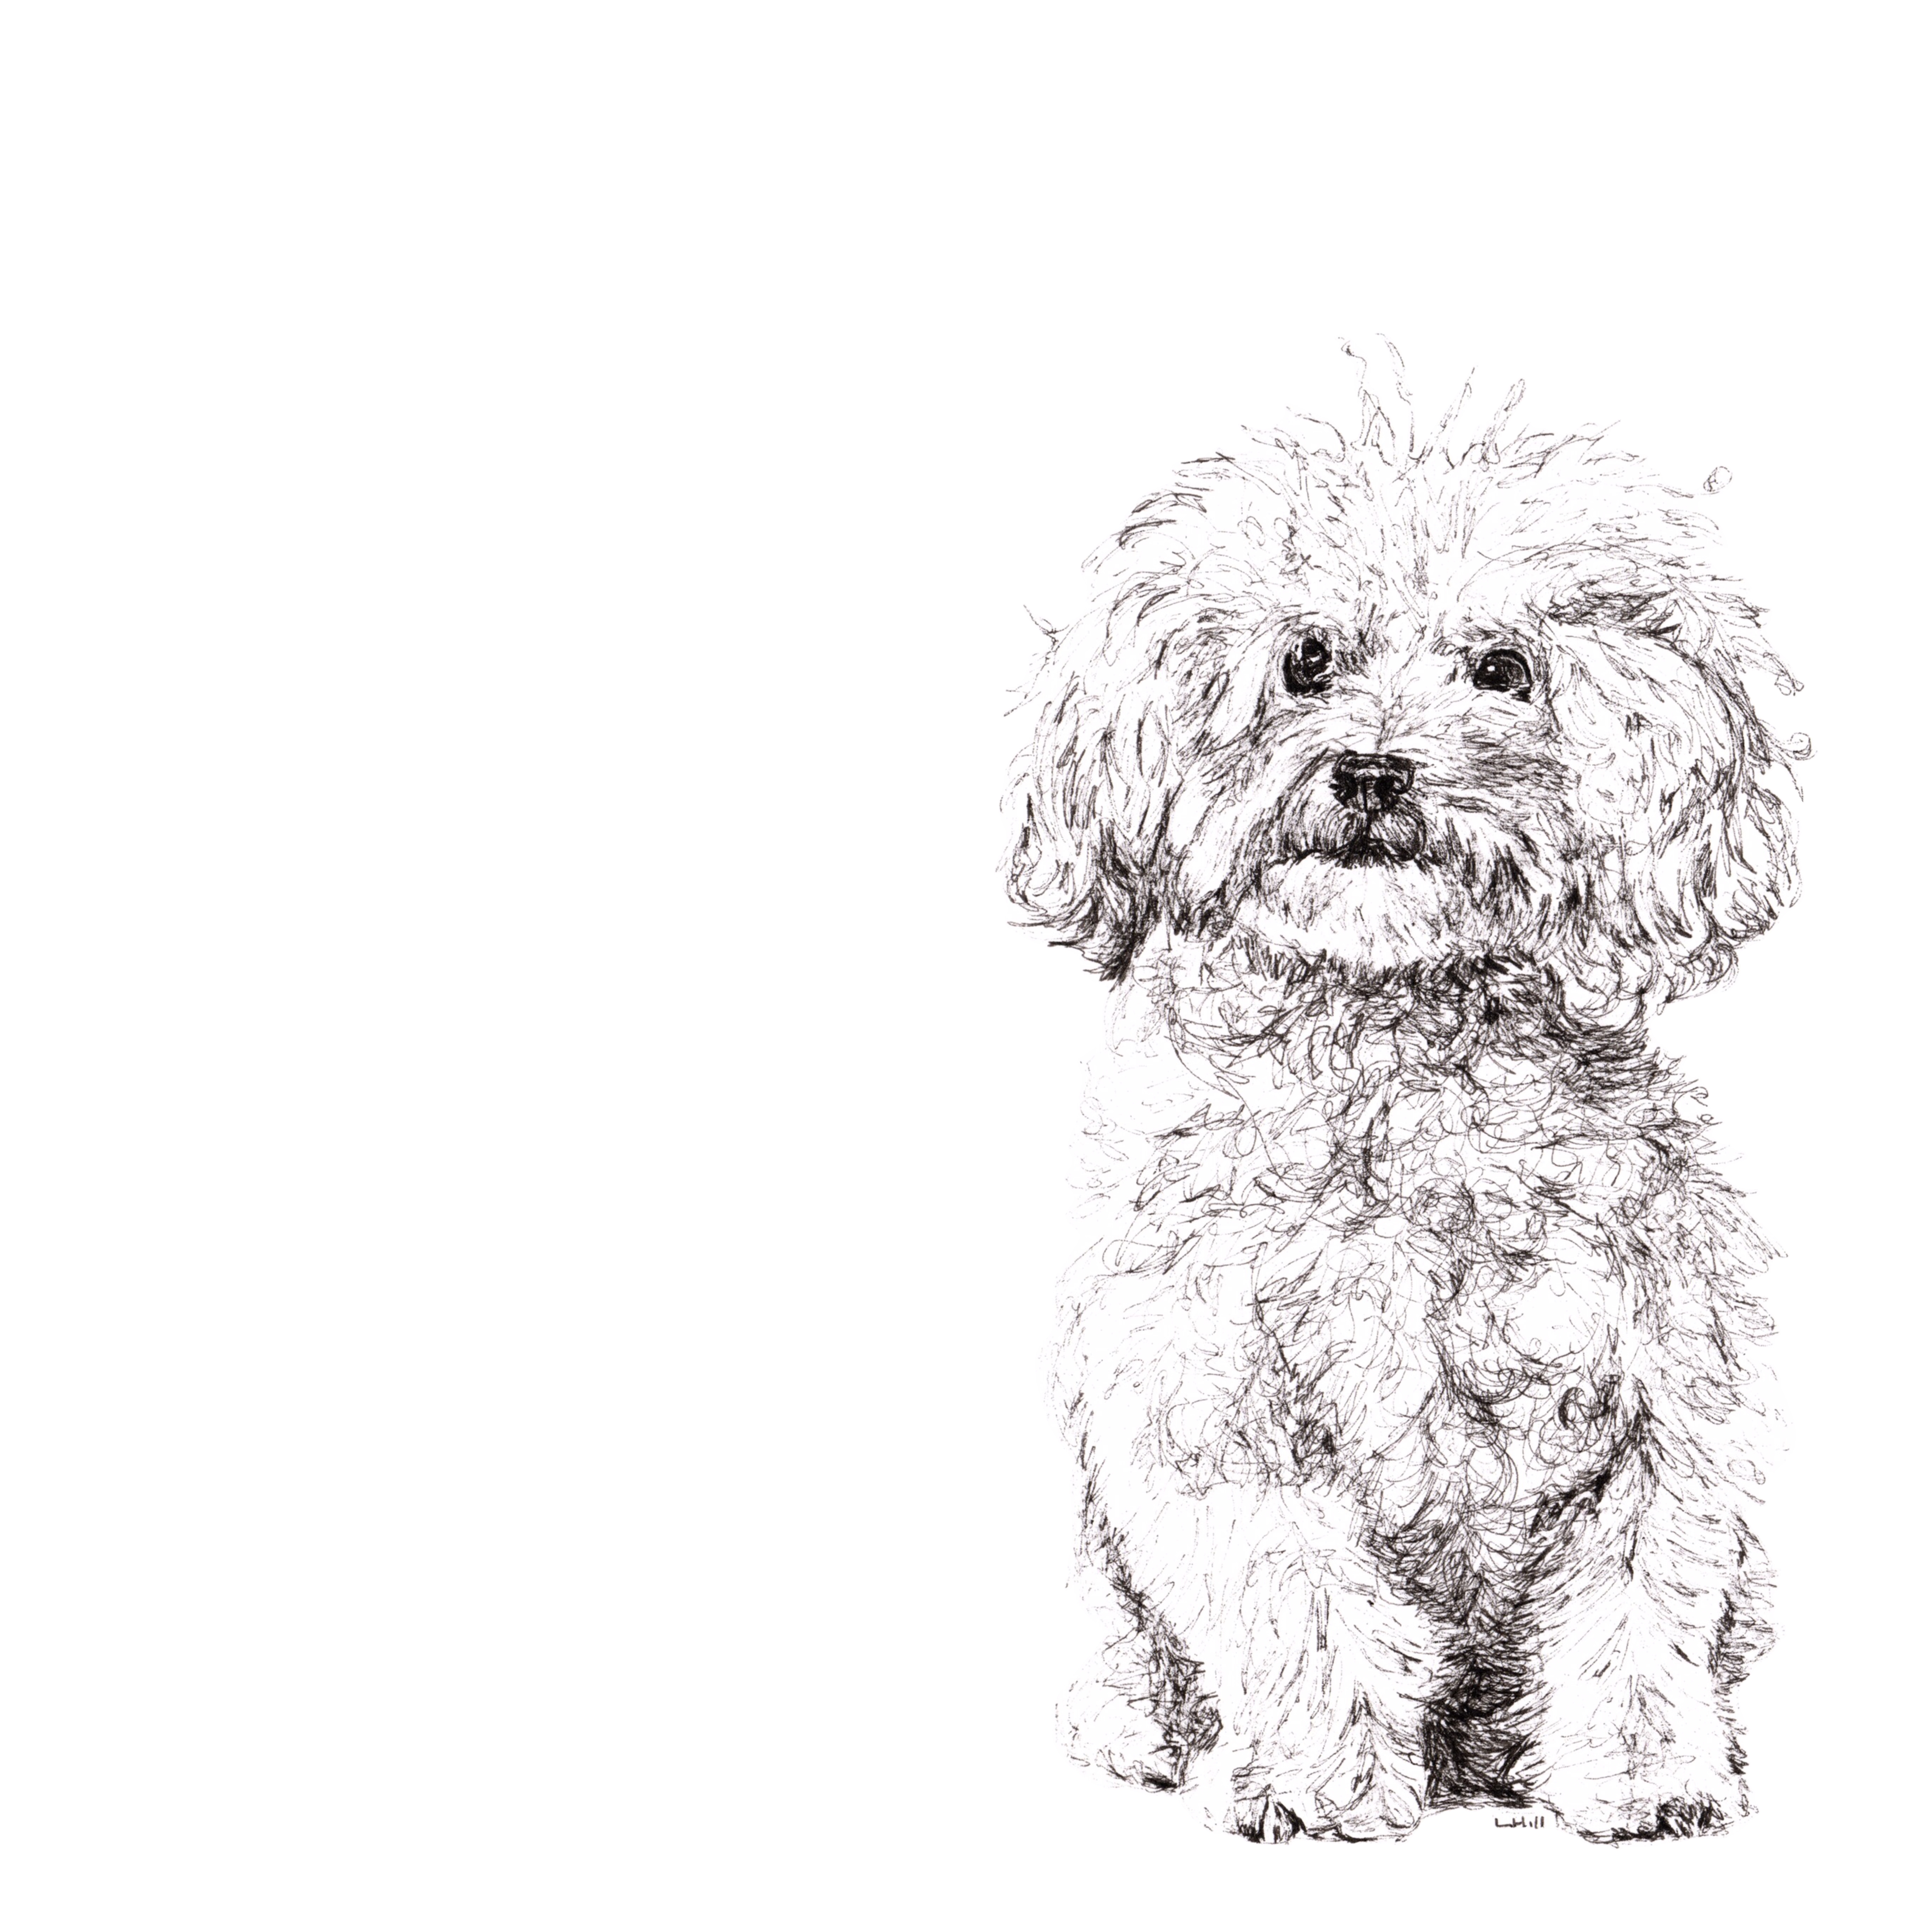 Bichon Frise pen and ink illustration by Louisa Hill